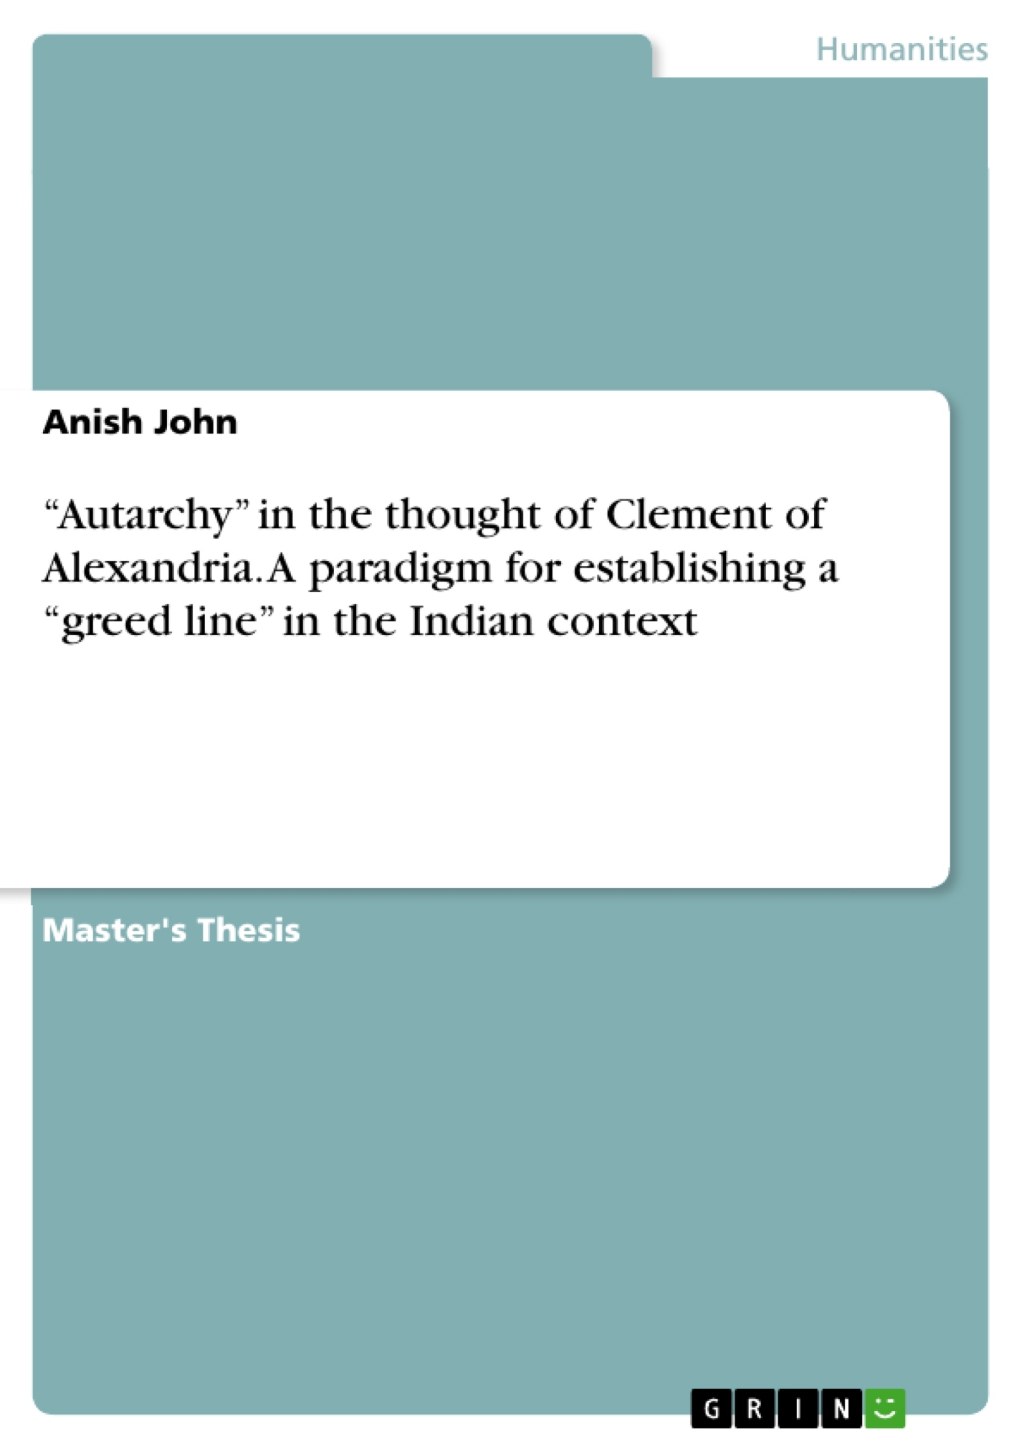 Picture of: Autarchy” in the thought of Clement of Alexandria